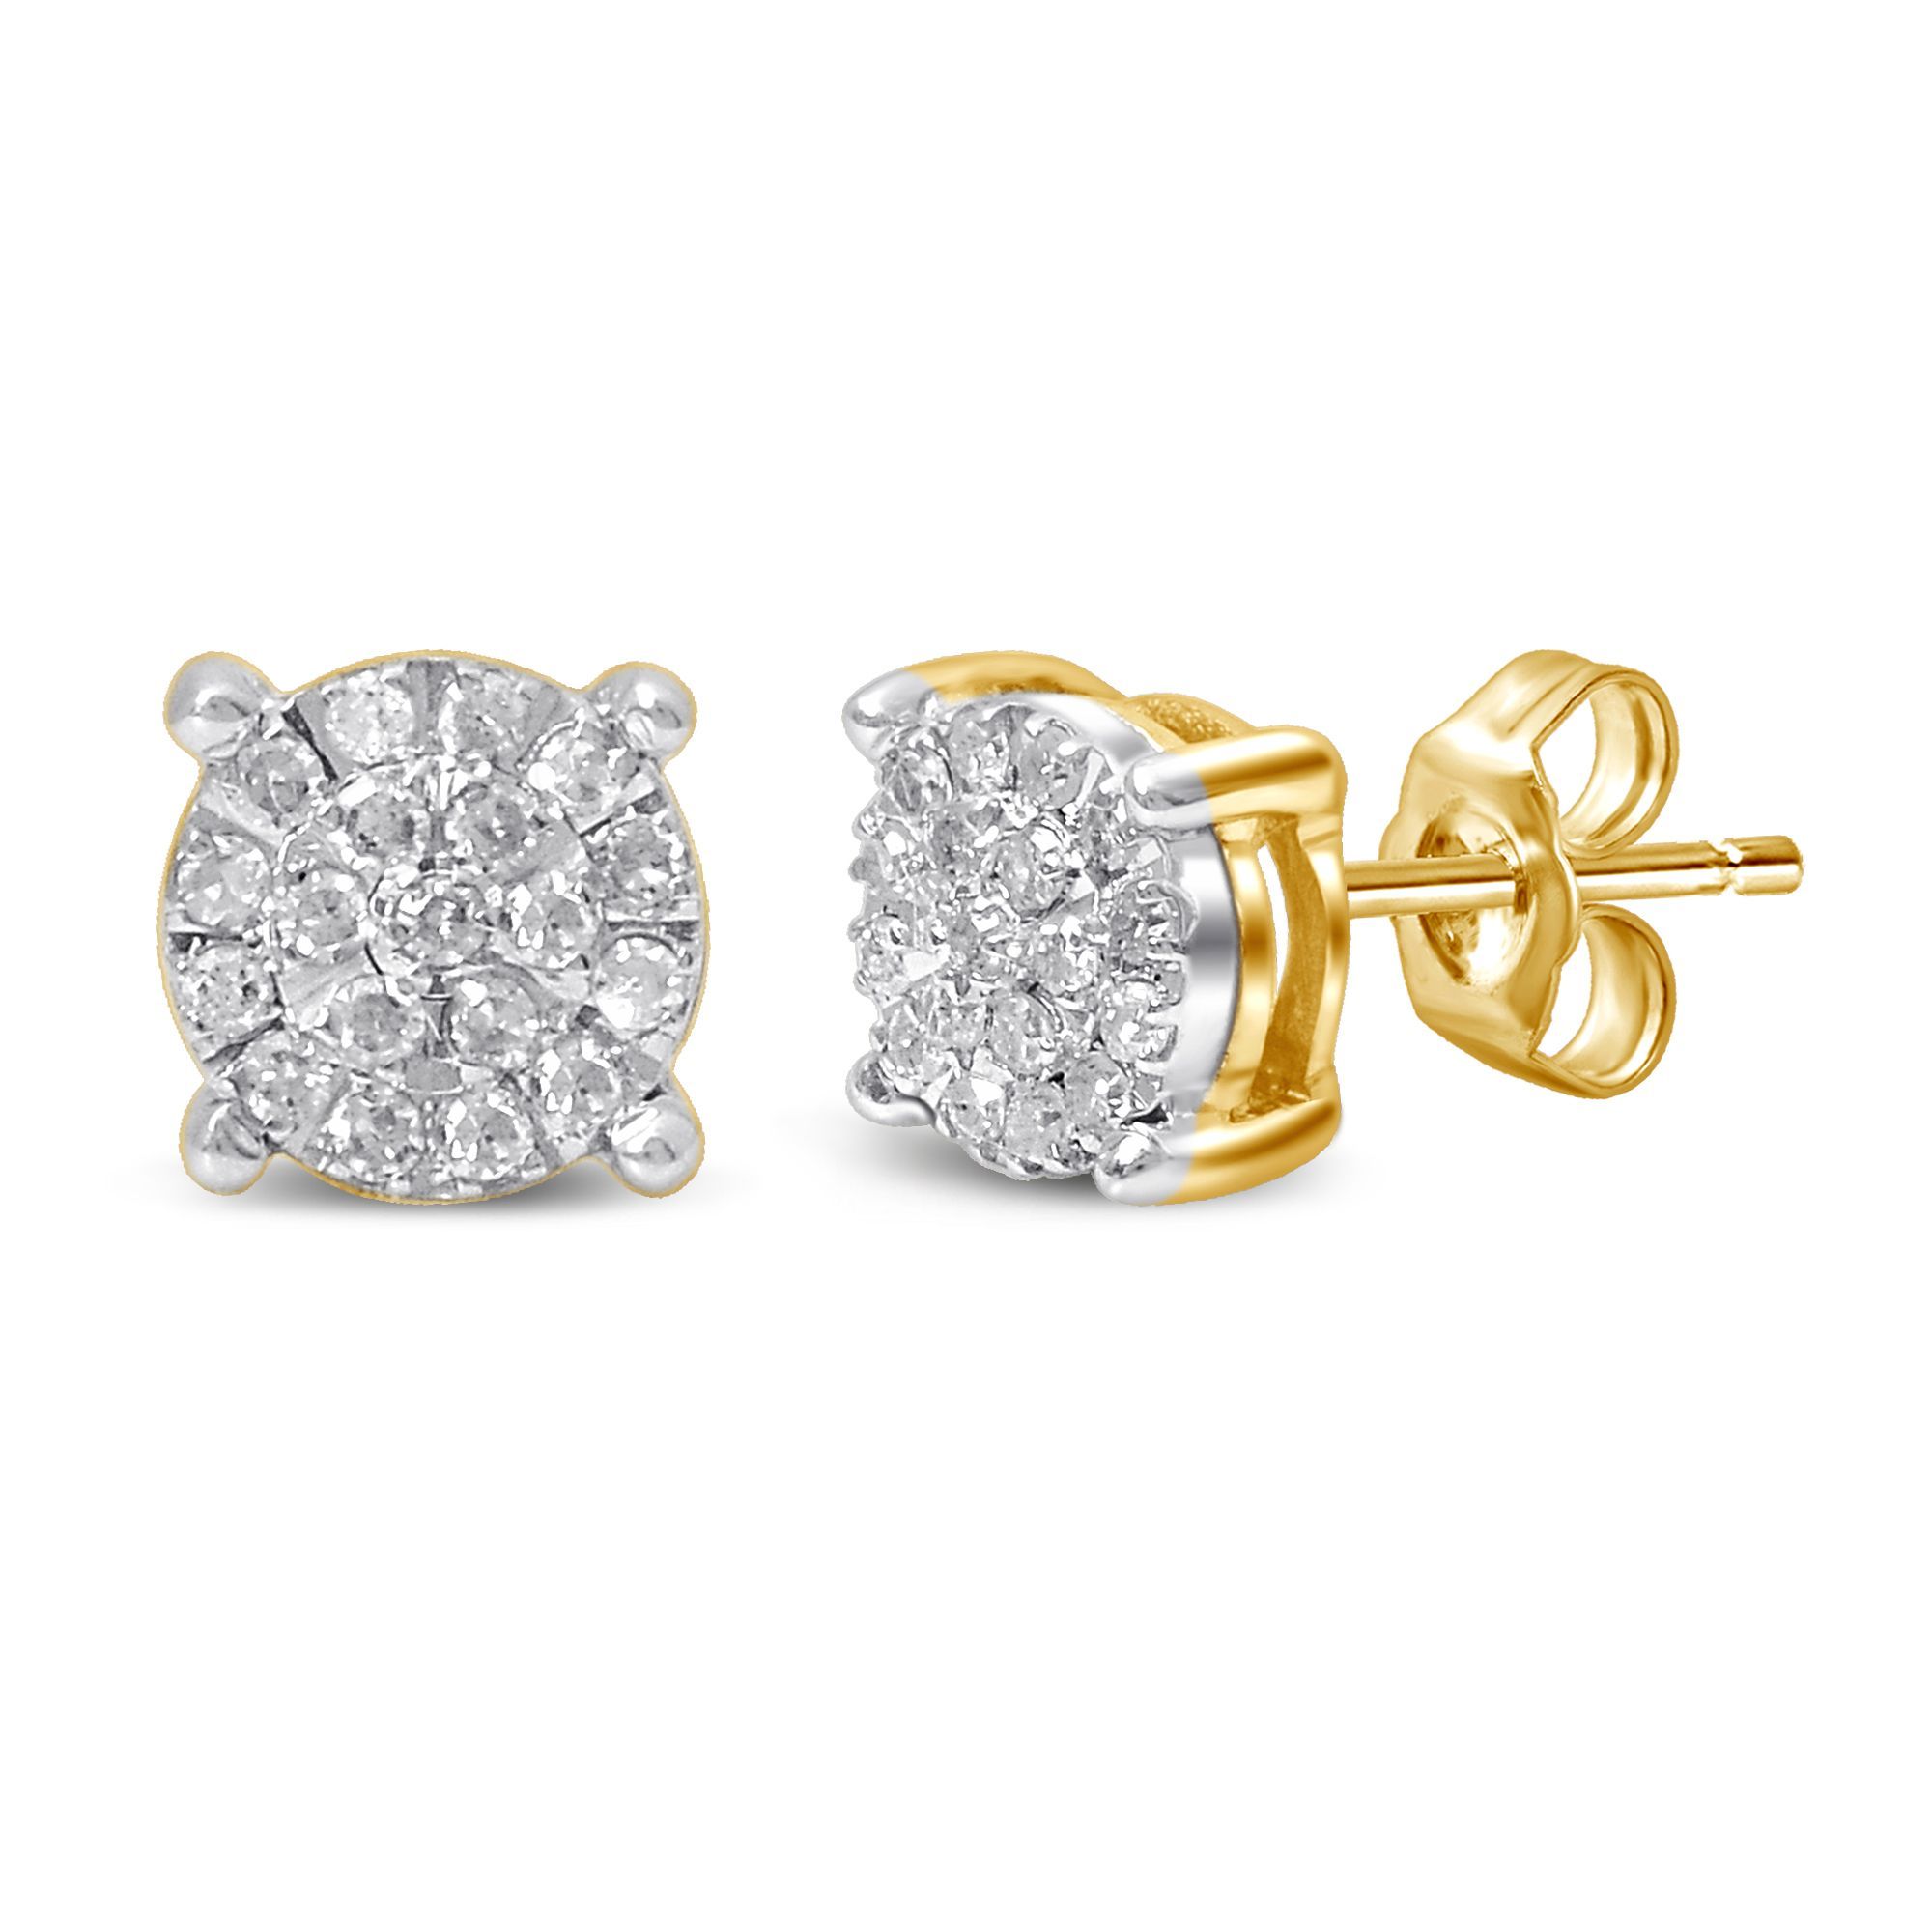 Martina Diamond Earrings with 0.15ct of Diamonds in 9ct Yellow Gold Earrings Bevilles 